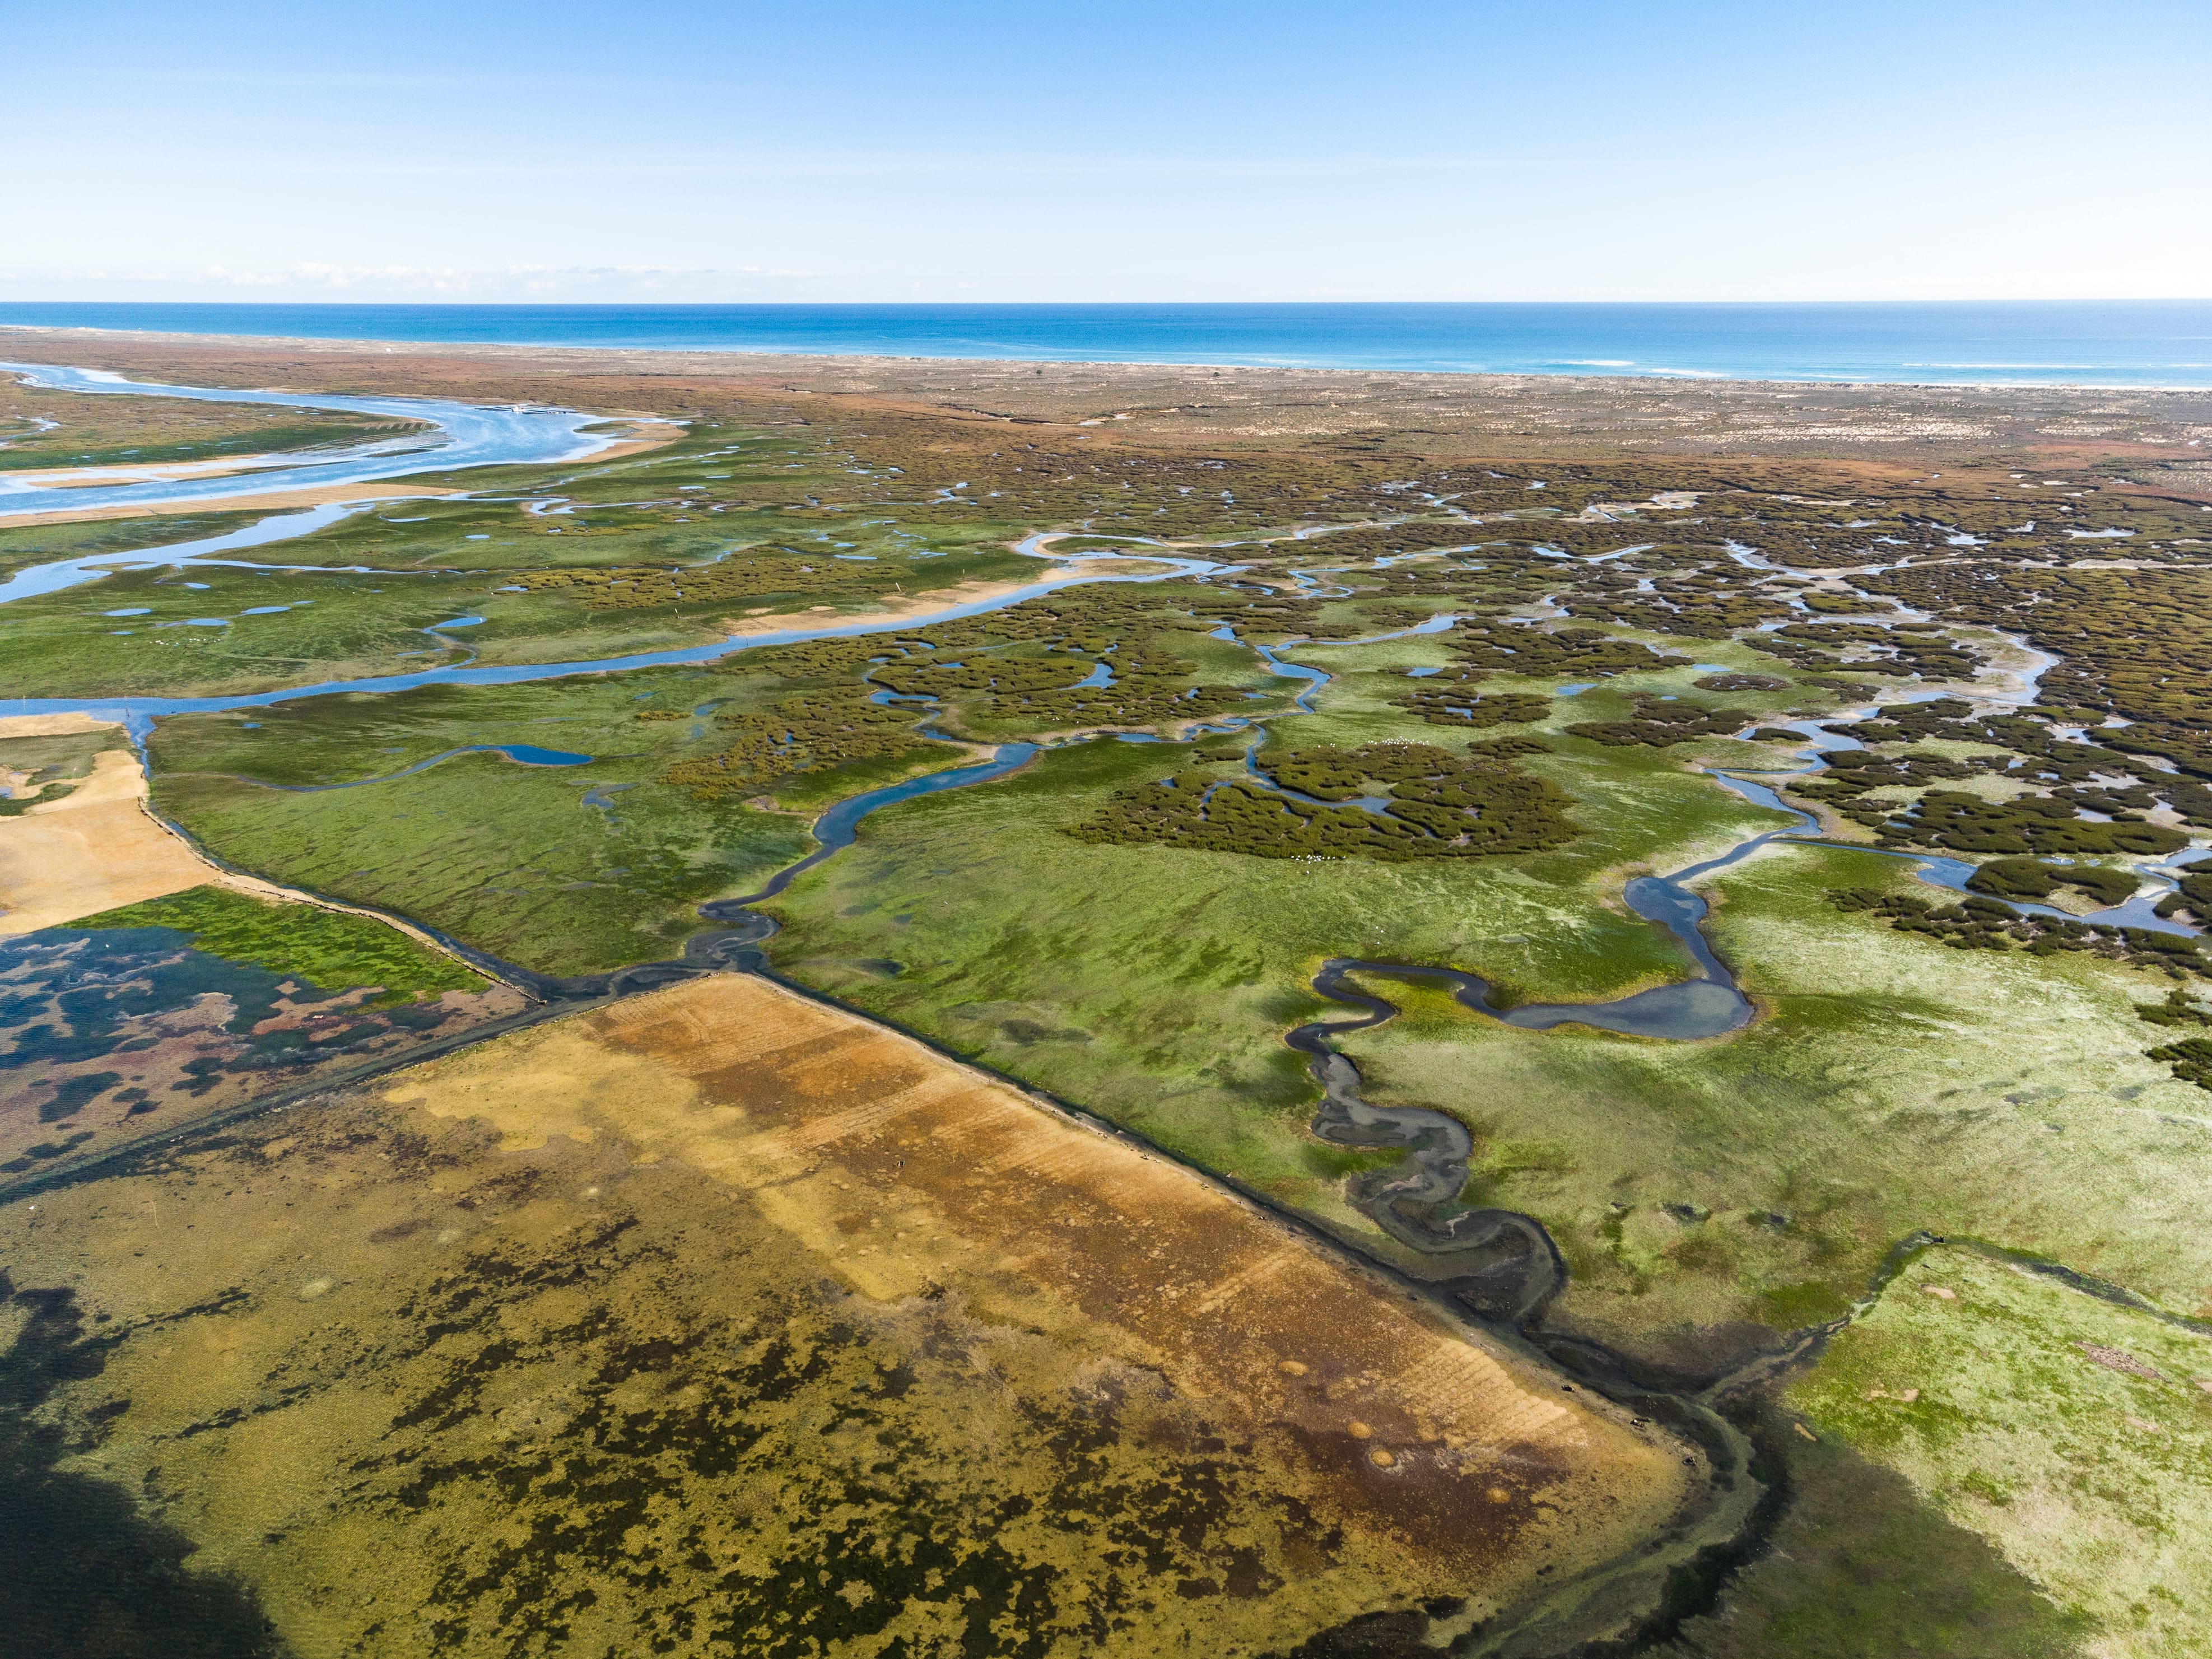 Aerial view of the Ria Formosa Natural Park in Olhao, Algarve, Portugal